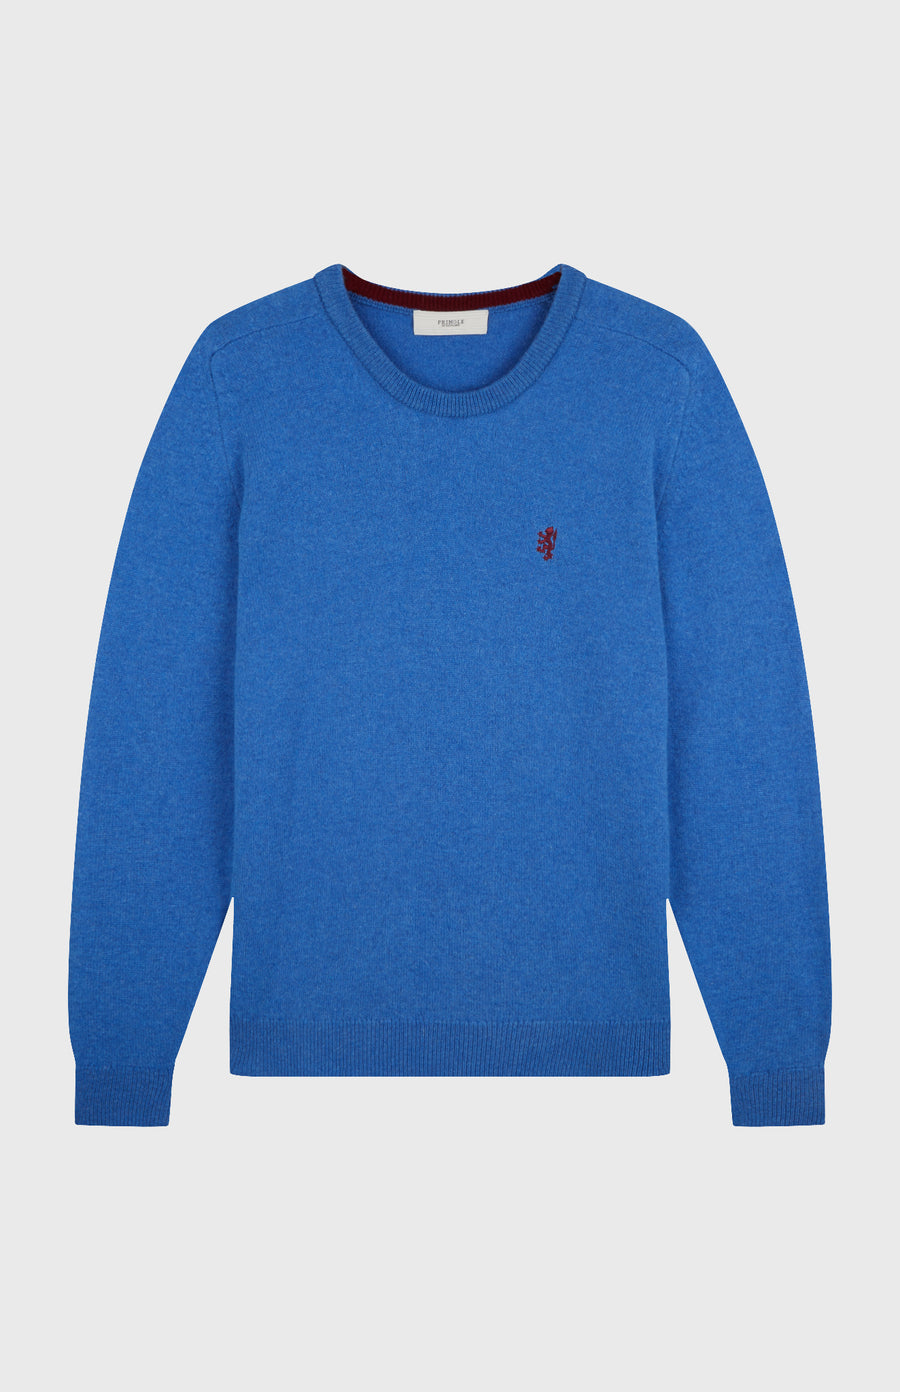 Round Neck Lion Lambswool Jumper In Blue Oxide flat shot - Pringle of Scotland